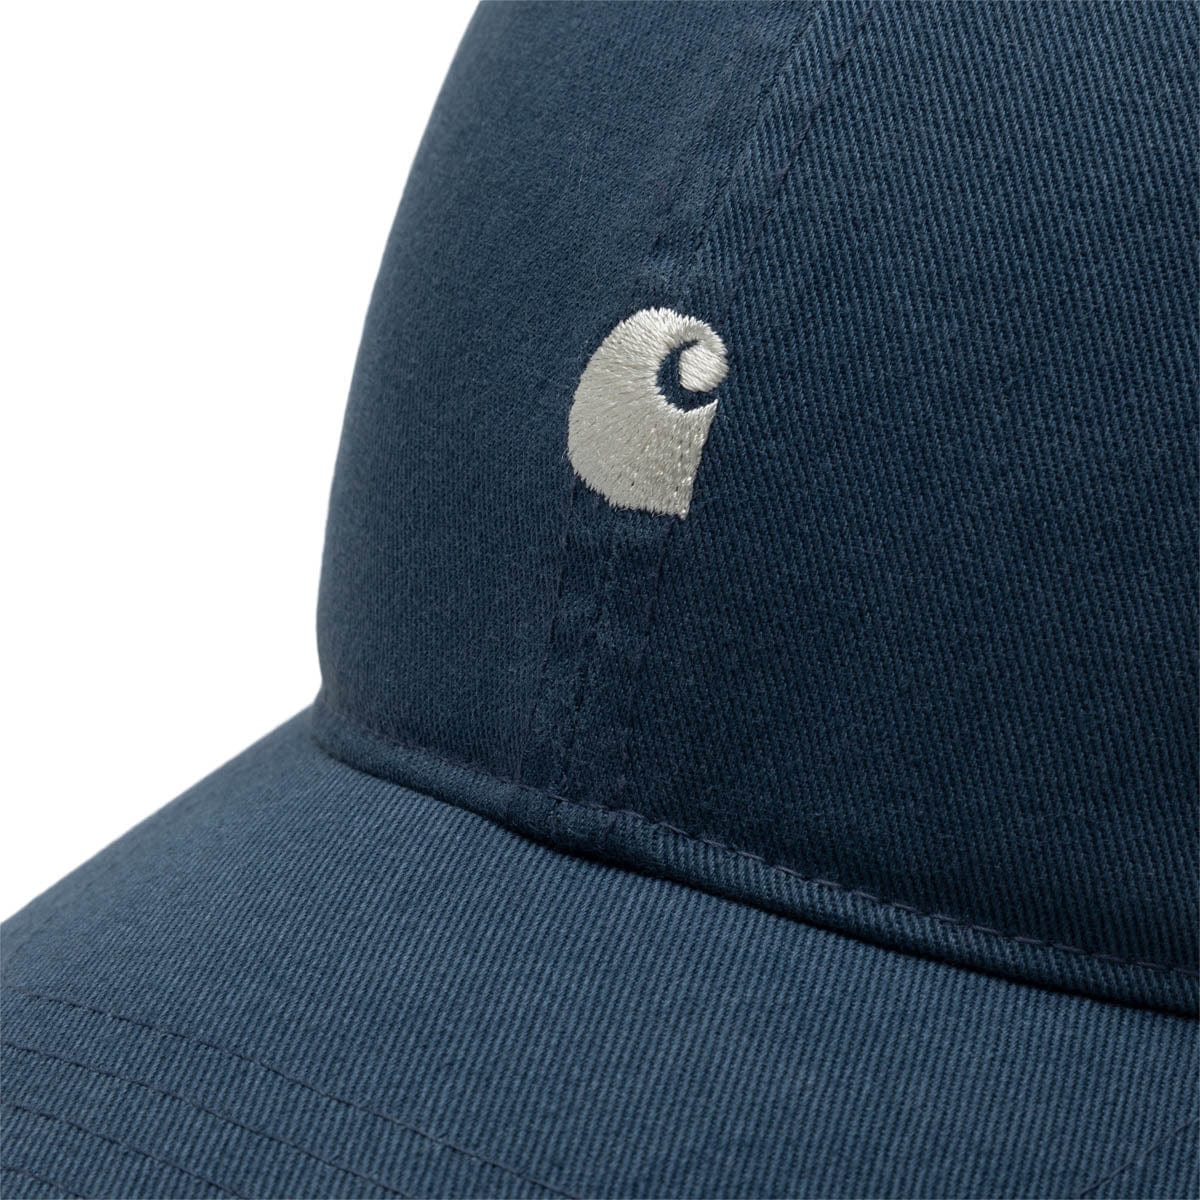 Carhartt WIP Accessories - HATS - Snapback-Fitted Hat STORM BLUE/WAX / O/S MADISON LOGO CAP